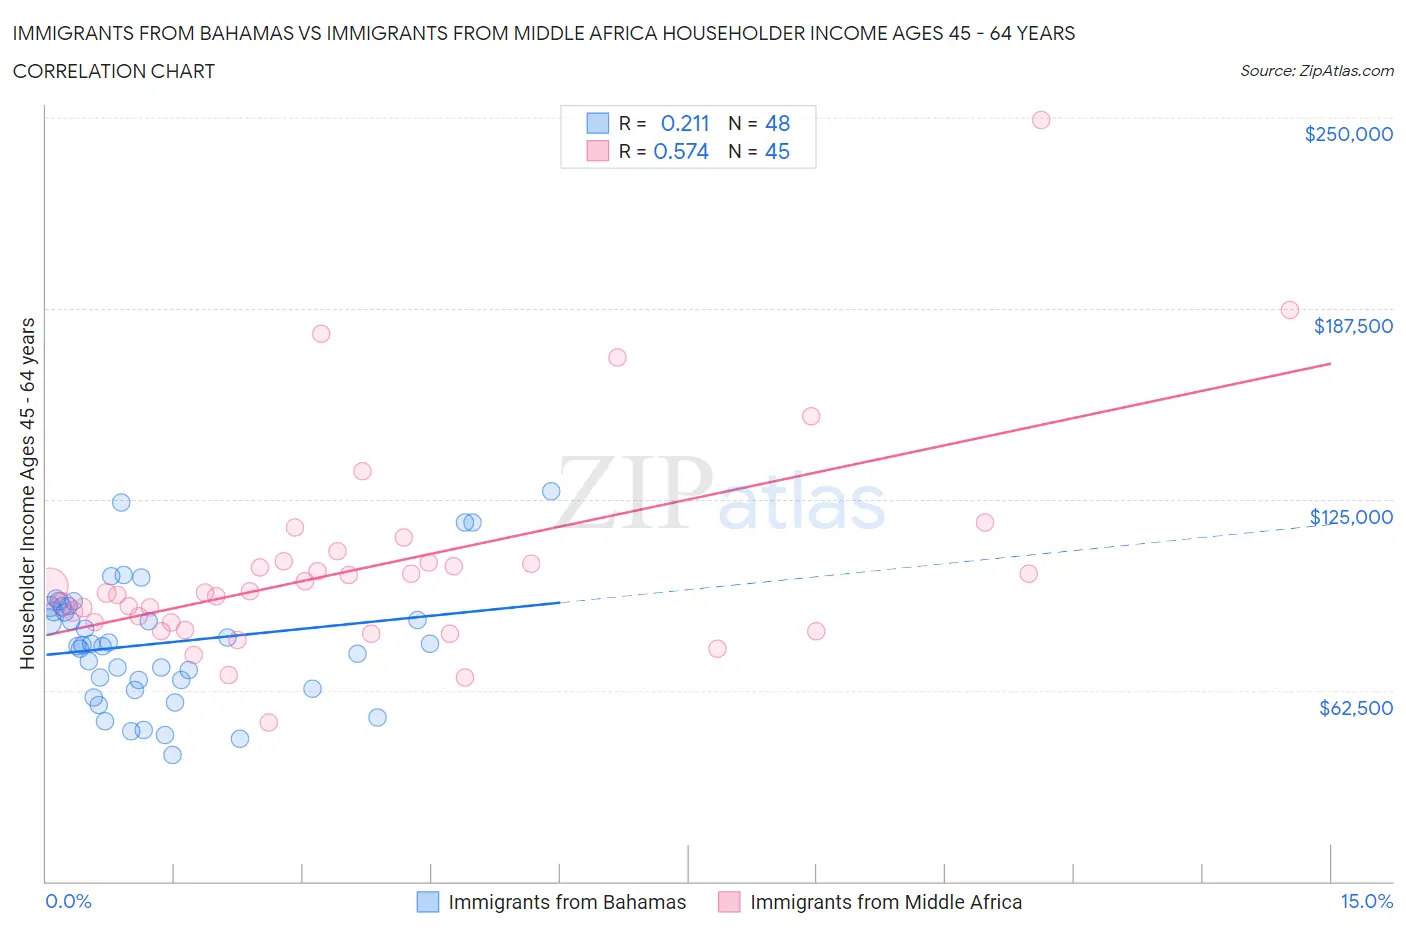 Immigrants from Bahamas vs Immigrants from Middle Africa Householder Income Ages 45 - 64 years